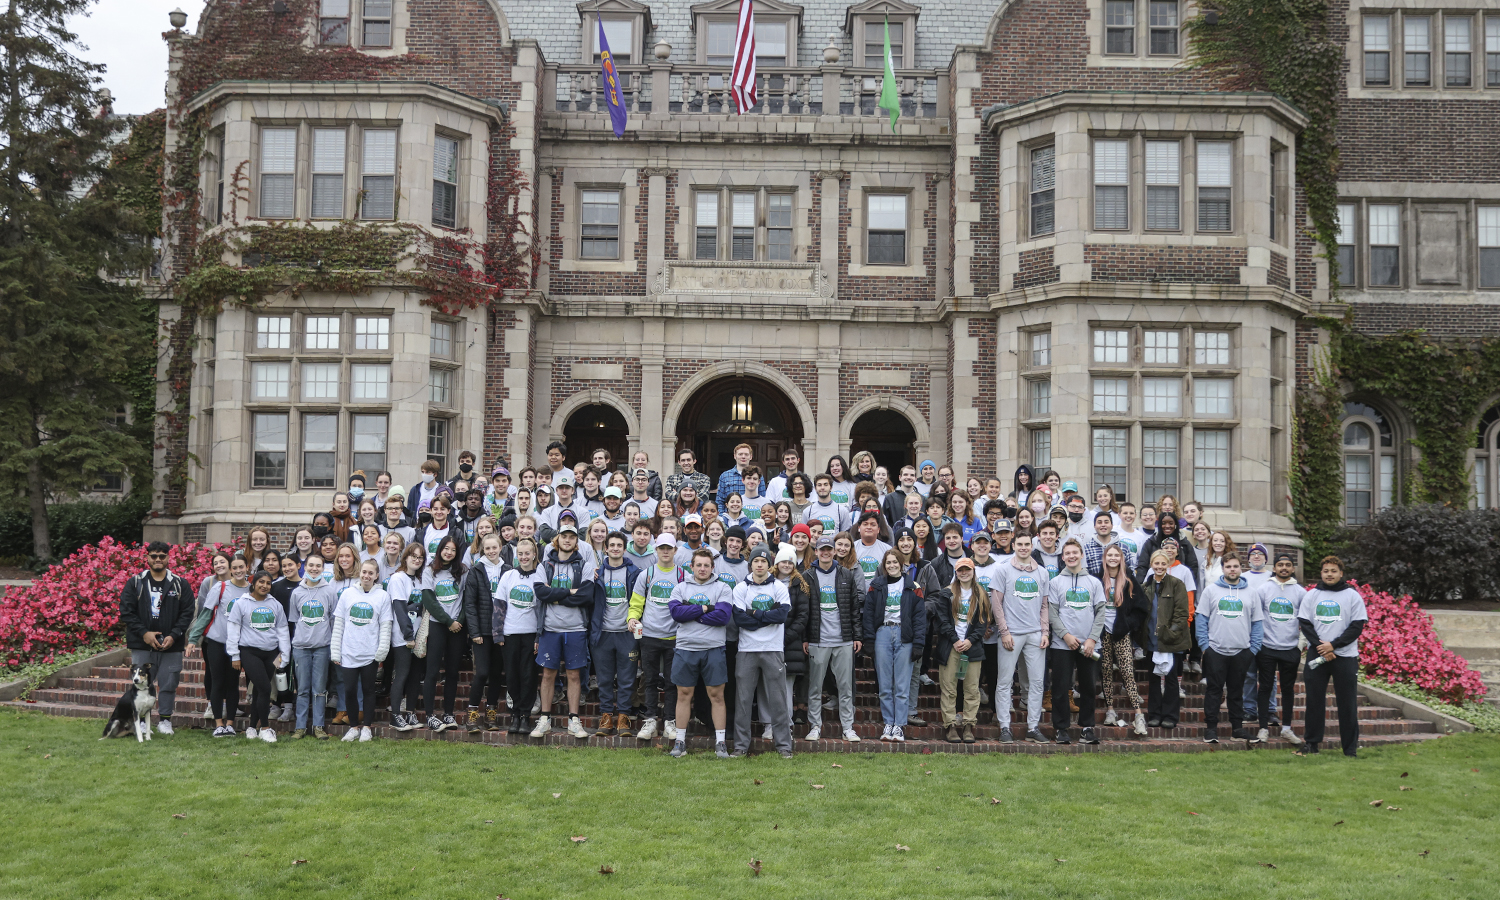 Students participating in Day of Service gather on the steps of Coxe Hall